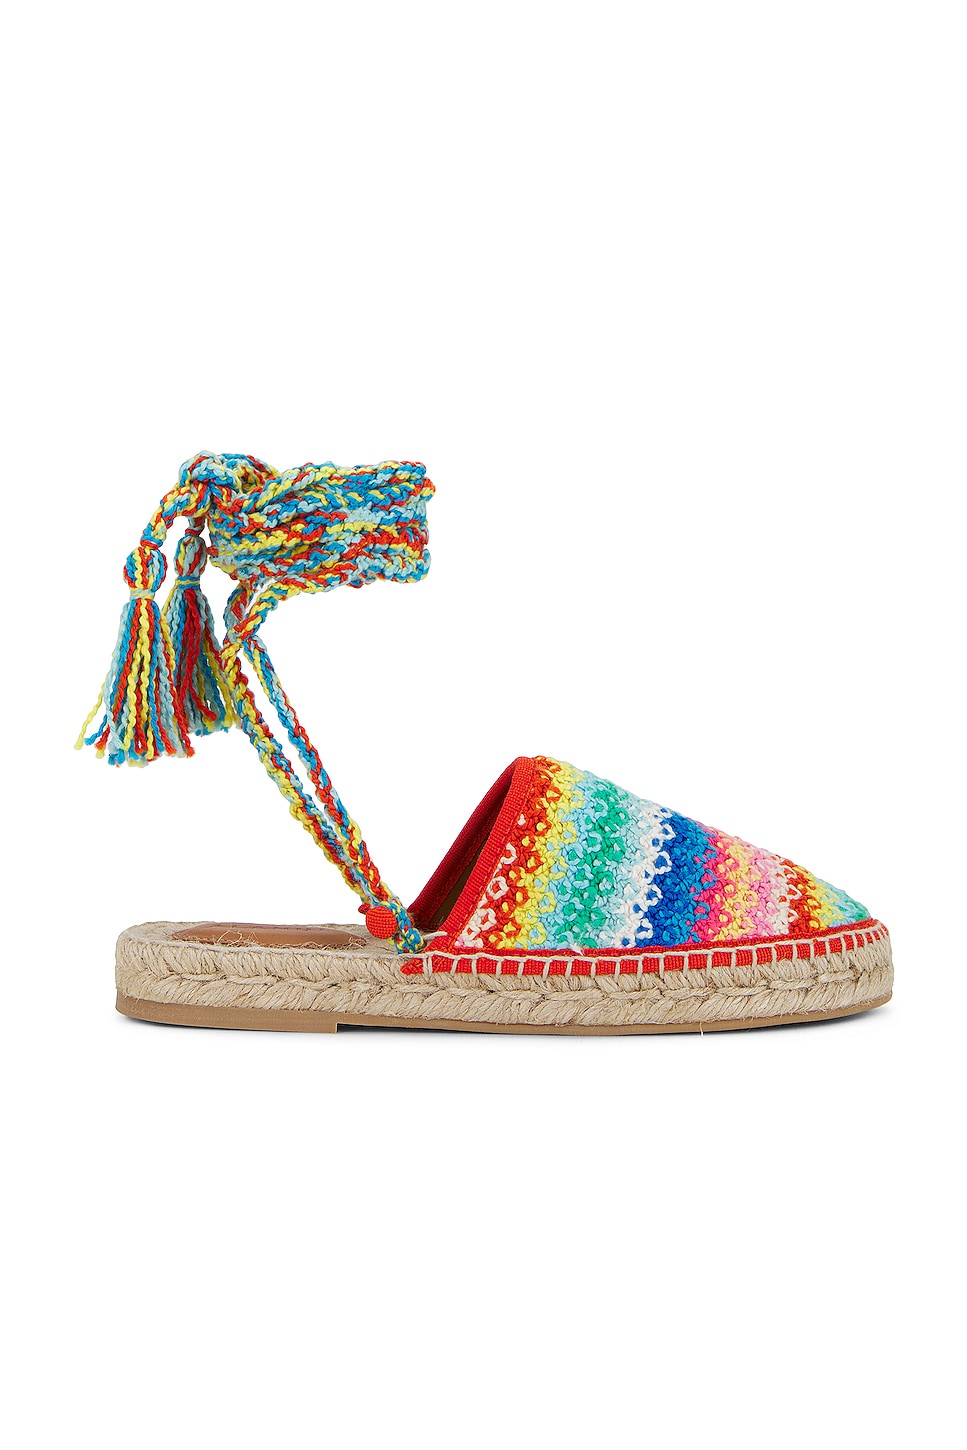 Over the Rainbow Espadrille in Blue